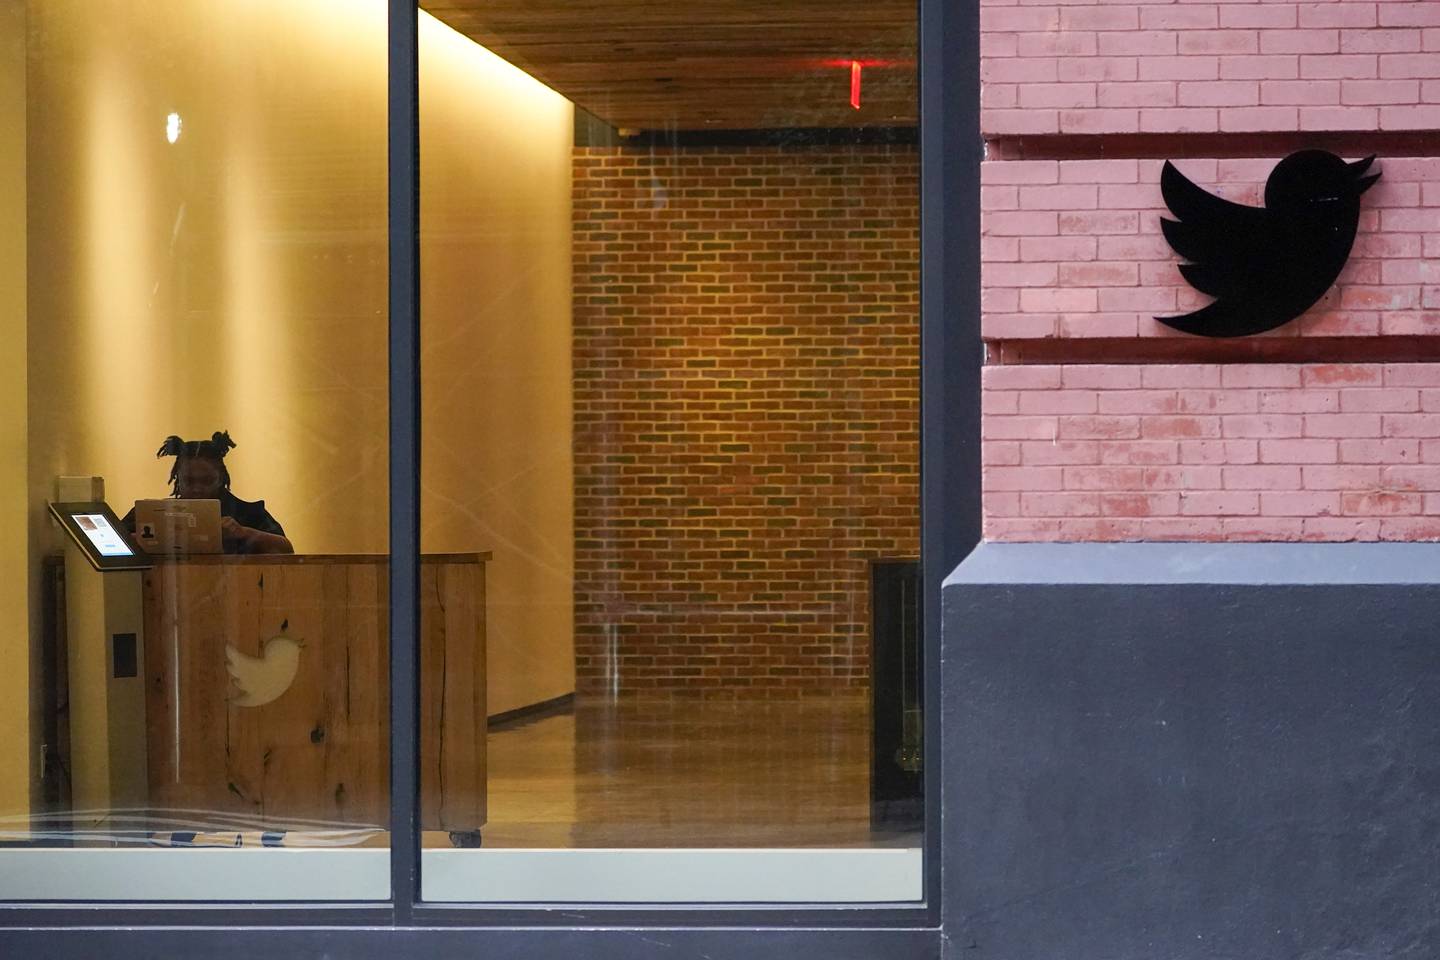 The lobby of the building that houses the Twitter office in New York, October  26. AP